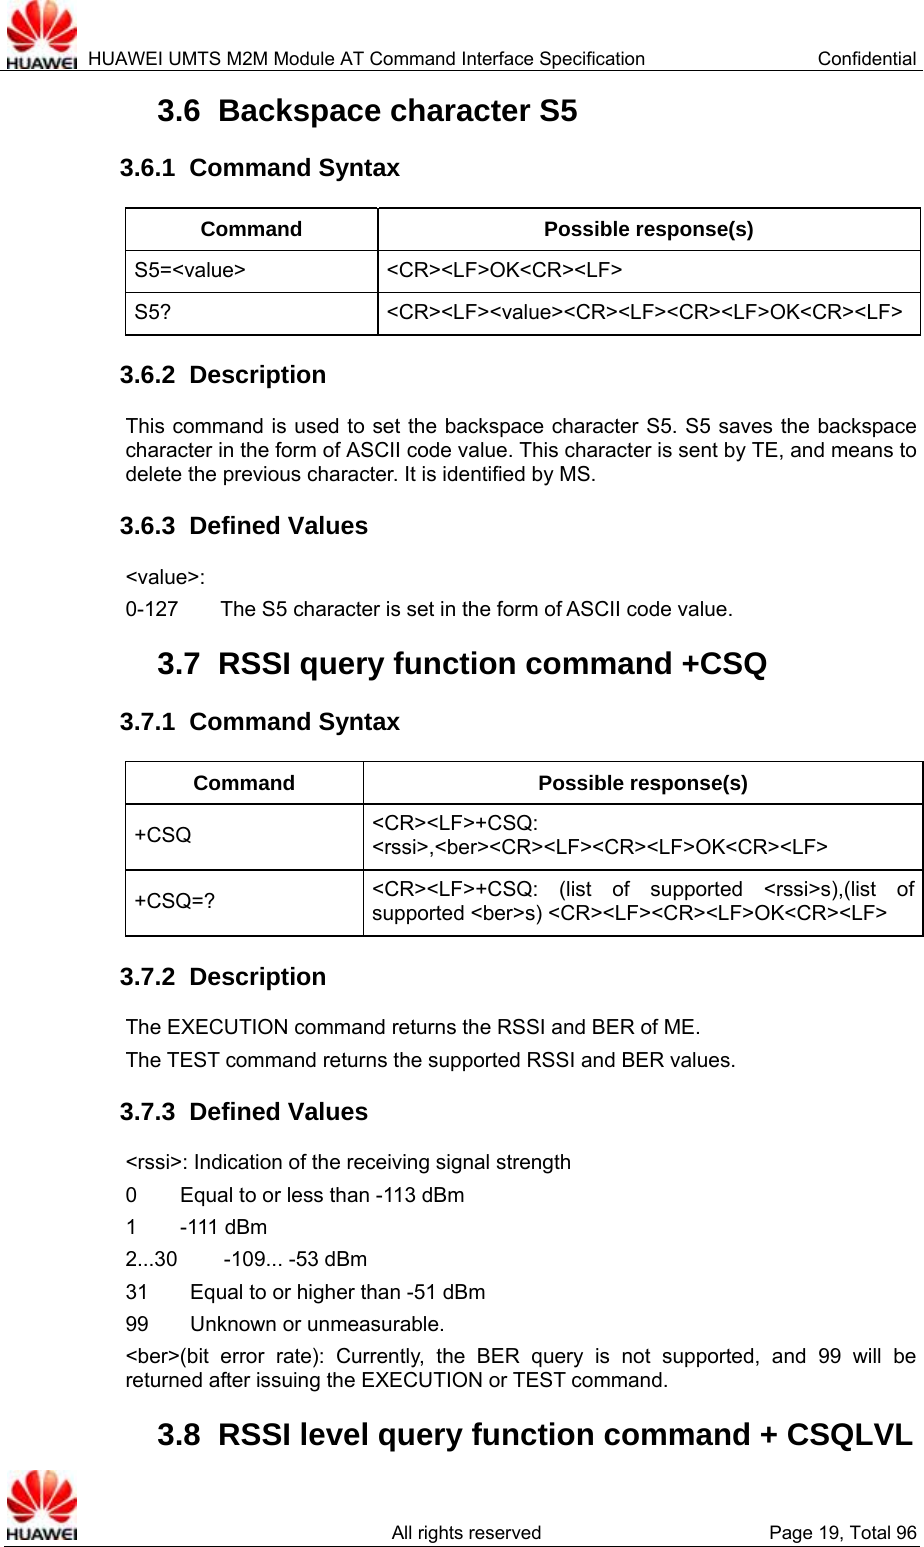  HUAWEI UMTS M2M Module AT Command Interface Specification  Confidential   All rights reserved  Page 19, Total 96 3.6  Backspace character S5 3.6.1  Command Syntax Command Possible response(s) S5=&lt;value&gt; &lt;CR&gt;&lt;LF&gt;OK&lt;CR&gt;&lt;LF&gt; S5? &lt;CR&gt;&lt;LF&gt;&lt;value&gt;&lt;CR&gt;&lt;LF&gt;&lt;CR&gt;&lt;LF&gt;OK&lt;CR&gt;&lt;LF&gt;3.6.2  Description This command is used to set the backspace character S5. S5 saves the backspace character in the form of ASCII code value. This character is sent by TE, and means to delete the previous character. It is identified by MS.   3.6.3  Defined Values &lt;value&gt;:  0-127        The S5 character is set in the form of ASCII code value.   3.7  RSSI query function command +CSQ 3.7.1  Command Syntax Command Possible response(s) +CSQ  &lt;CR&gt;&lt;LF&gt;+CSQ: &lt;rssi&gt;,&lt;ber&gt;&lt;CR&gt;&lt;LF&gt;&lt;CR&gt;&lt;LF&gt;OK&lt;CR&gt;&lt;LF&gt; +CSQ=?  &lt;CR&gt;&lt;LF&gt;+CSQ: (list of supported &lt;rssi&gt;s),(list of supported &lt;ber&gt;s) &lt;CR&gt;&lt;LF&gt;&lt;CR&gt;&lt;LF&gt;OK&lt;CR&gt;&lt;LF&gt; 3.7.2  Description The EXECUTION command returns the RSSI and BER of ME.   The TEST command returns the supported RSSI and BER values.   3.7.3  Defined Values &lt;rssi&gt;: Indication of the receiving signal strength   0     Equal to or less than -113 dBm 1     -111 dBm 2...30     -109... -53 dBm 31        Equal to or higher than -51 dBm 99    Unknown or unmeasurable.  &lt;ber&gt;(bit error rate): Currently, the BER query is not supported, and 99 will be returned after issuing the EXECUTION or TEST command.   3.8  RSSI level query function command + CSQLVL   